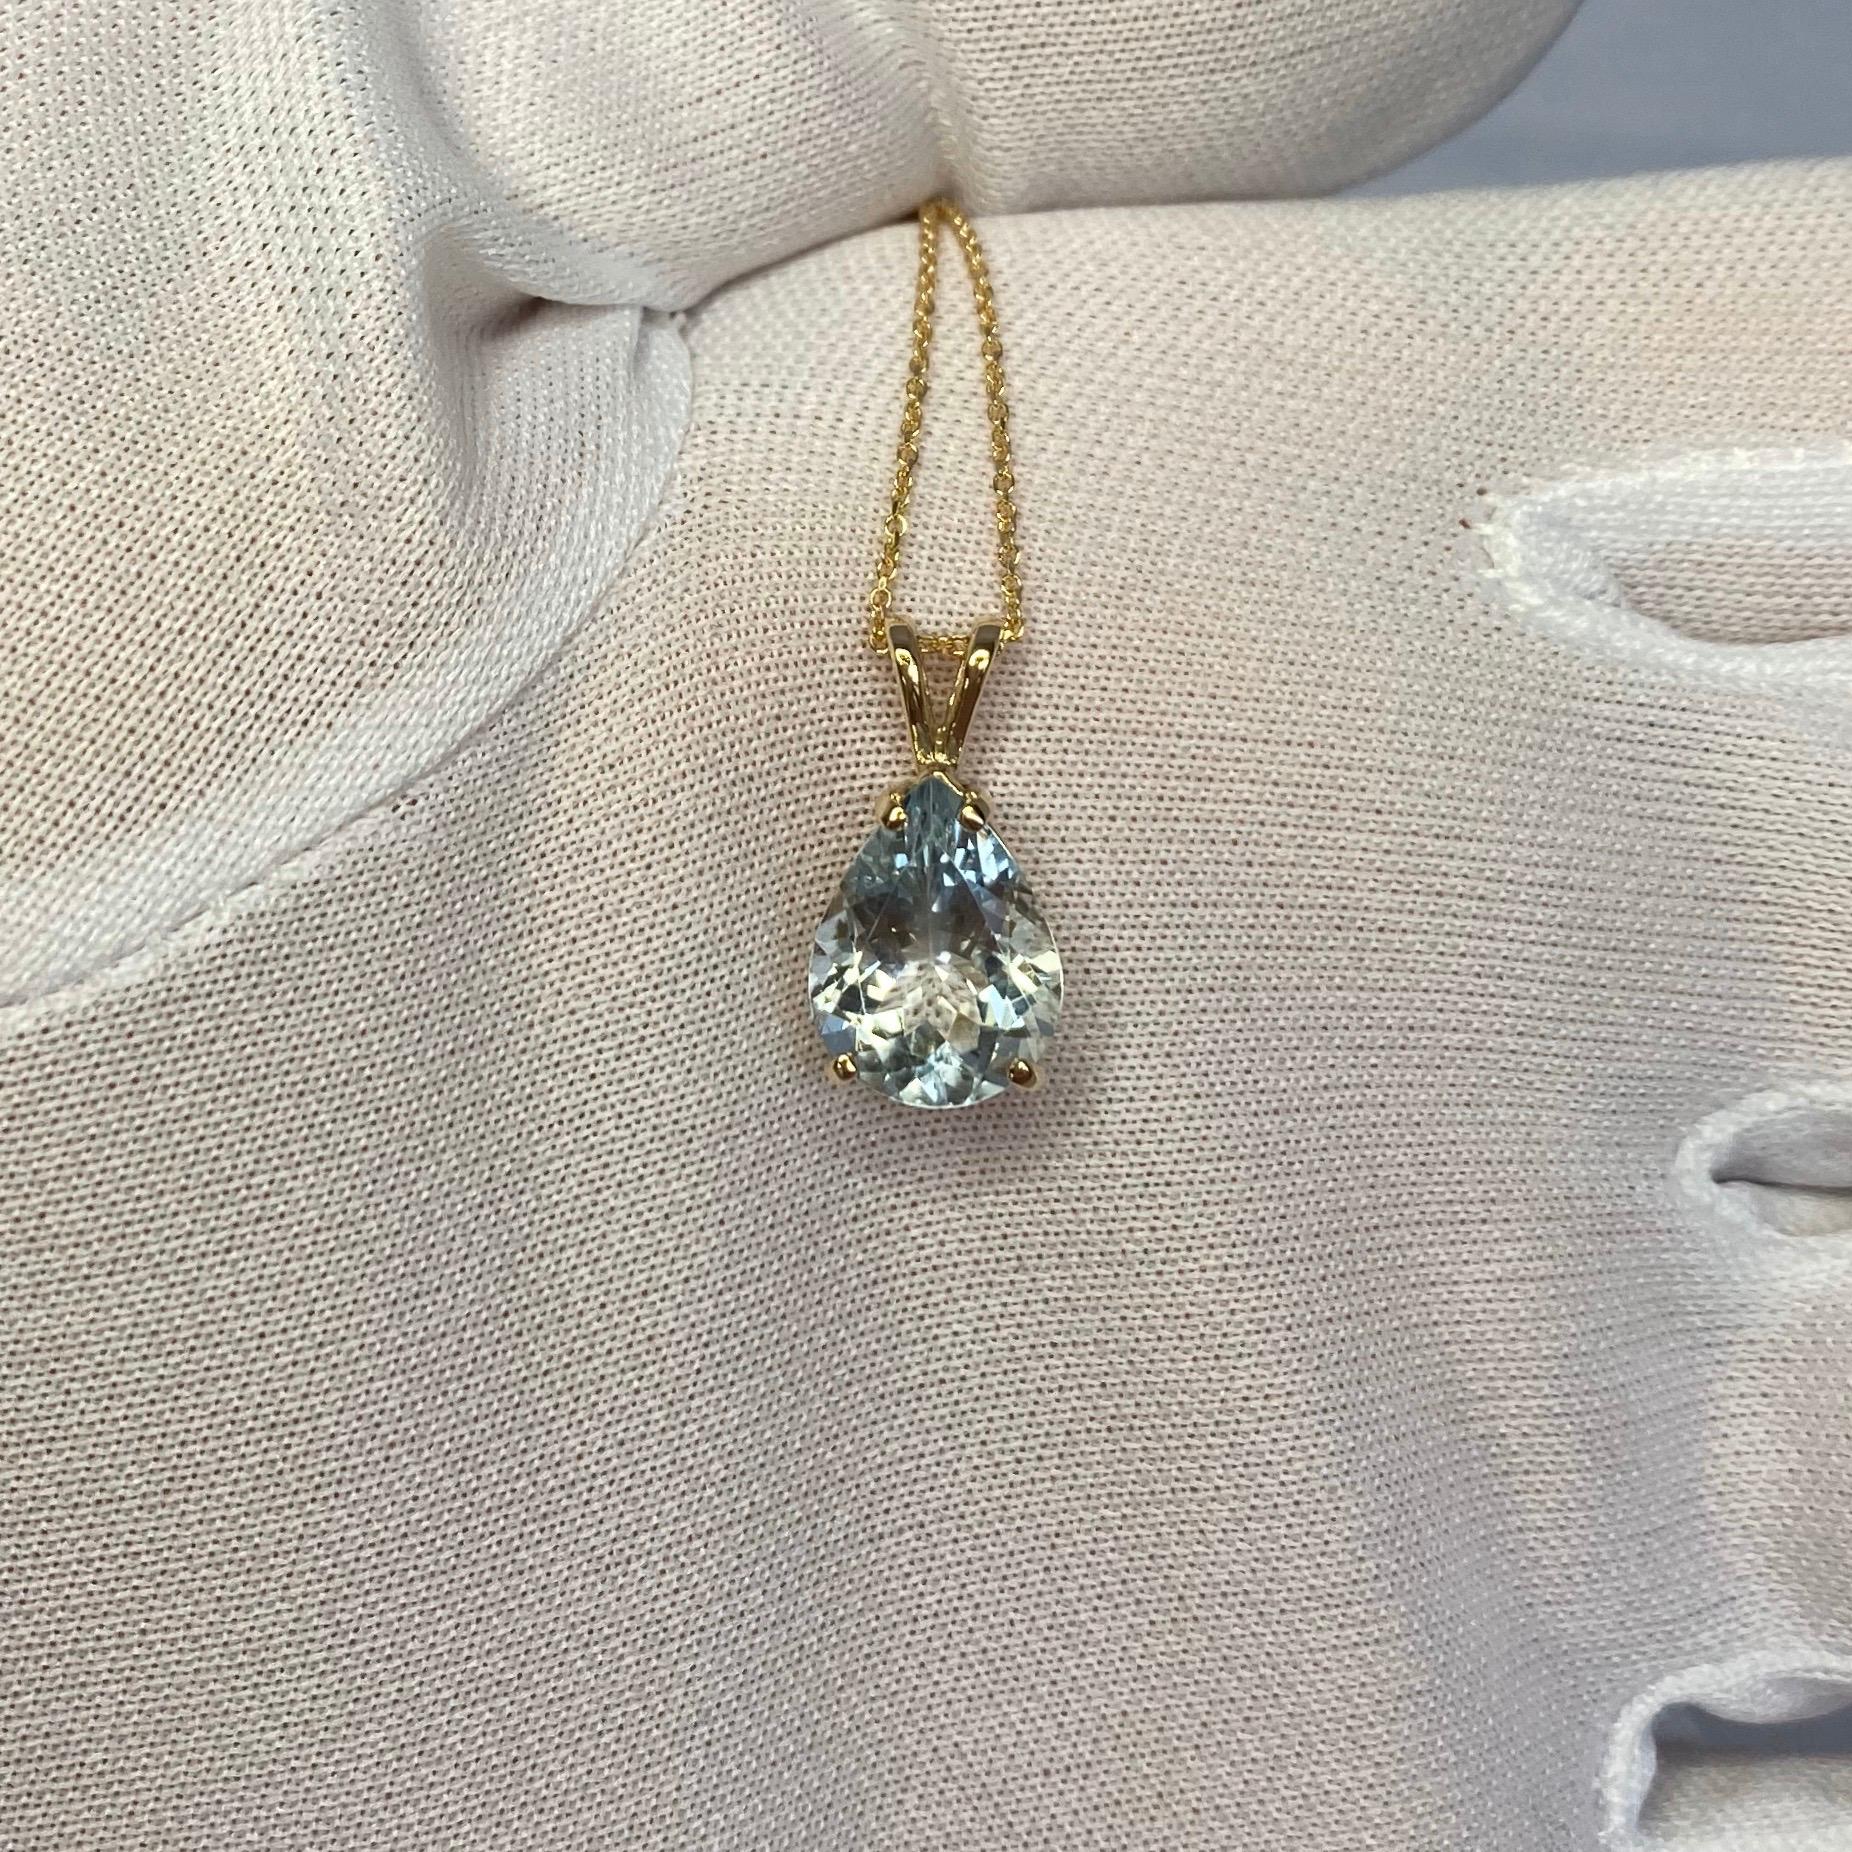 3.00 carat light blue Aquamarine set in a fine 14k yellow gold solitaire pendant.
Excellent clarity, very clean stone.

Also has an excellent pear cut showing lots of brightness and light return. Very sparkly.

Stone measures 11.7x9mm

The pendant